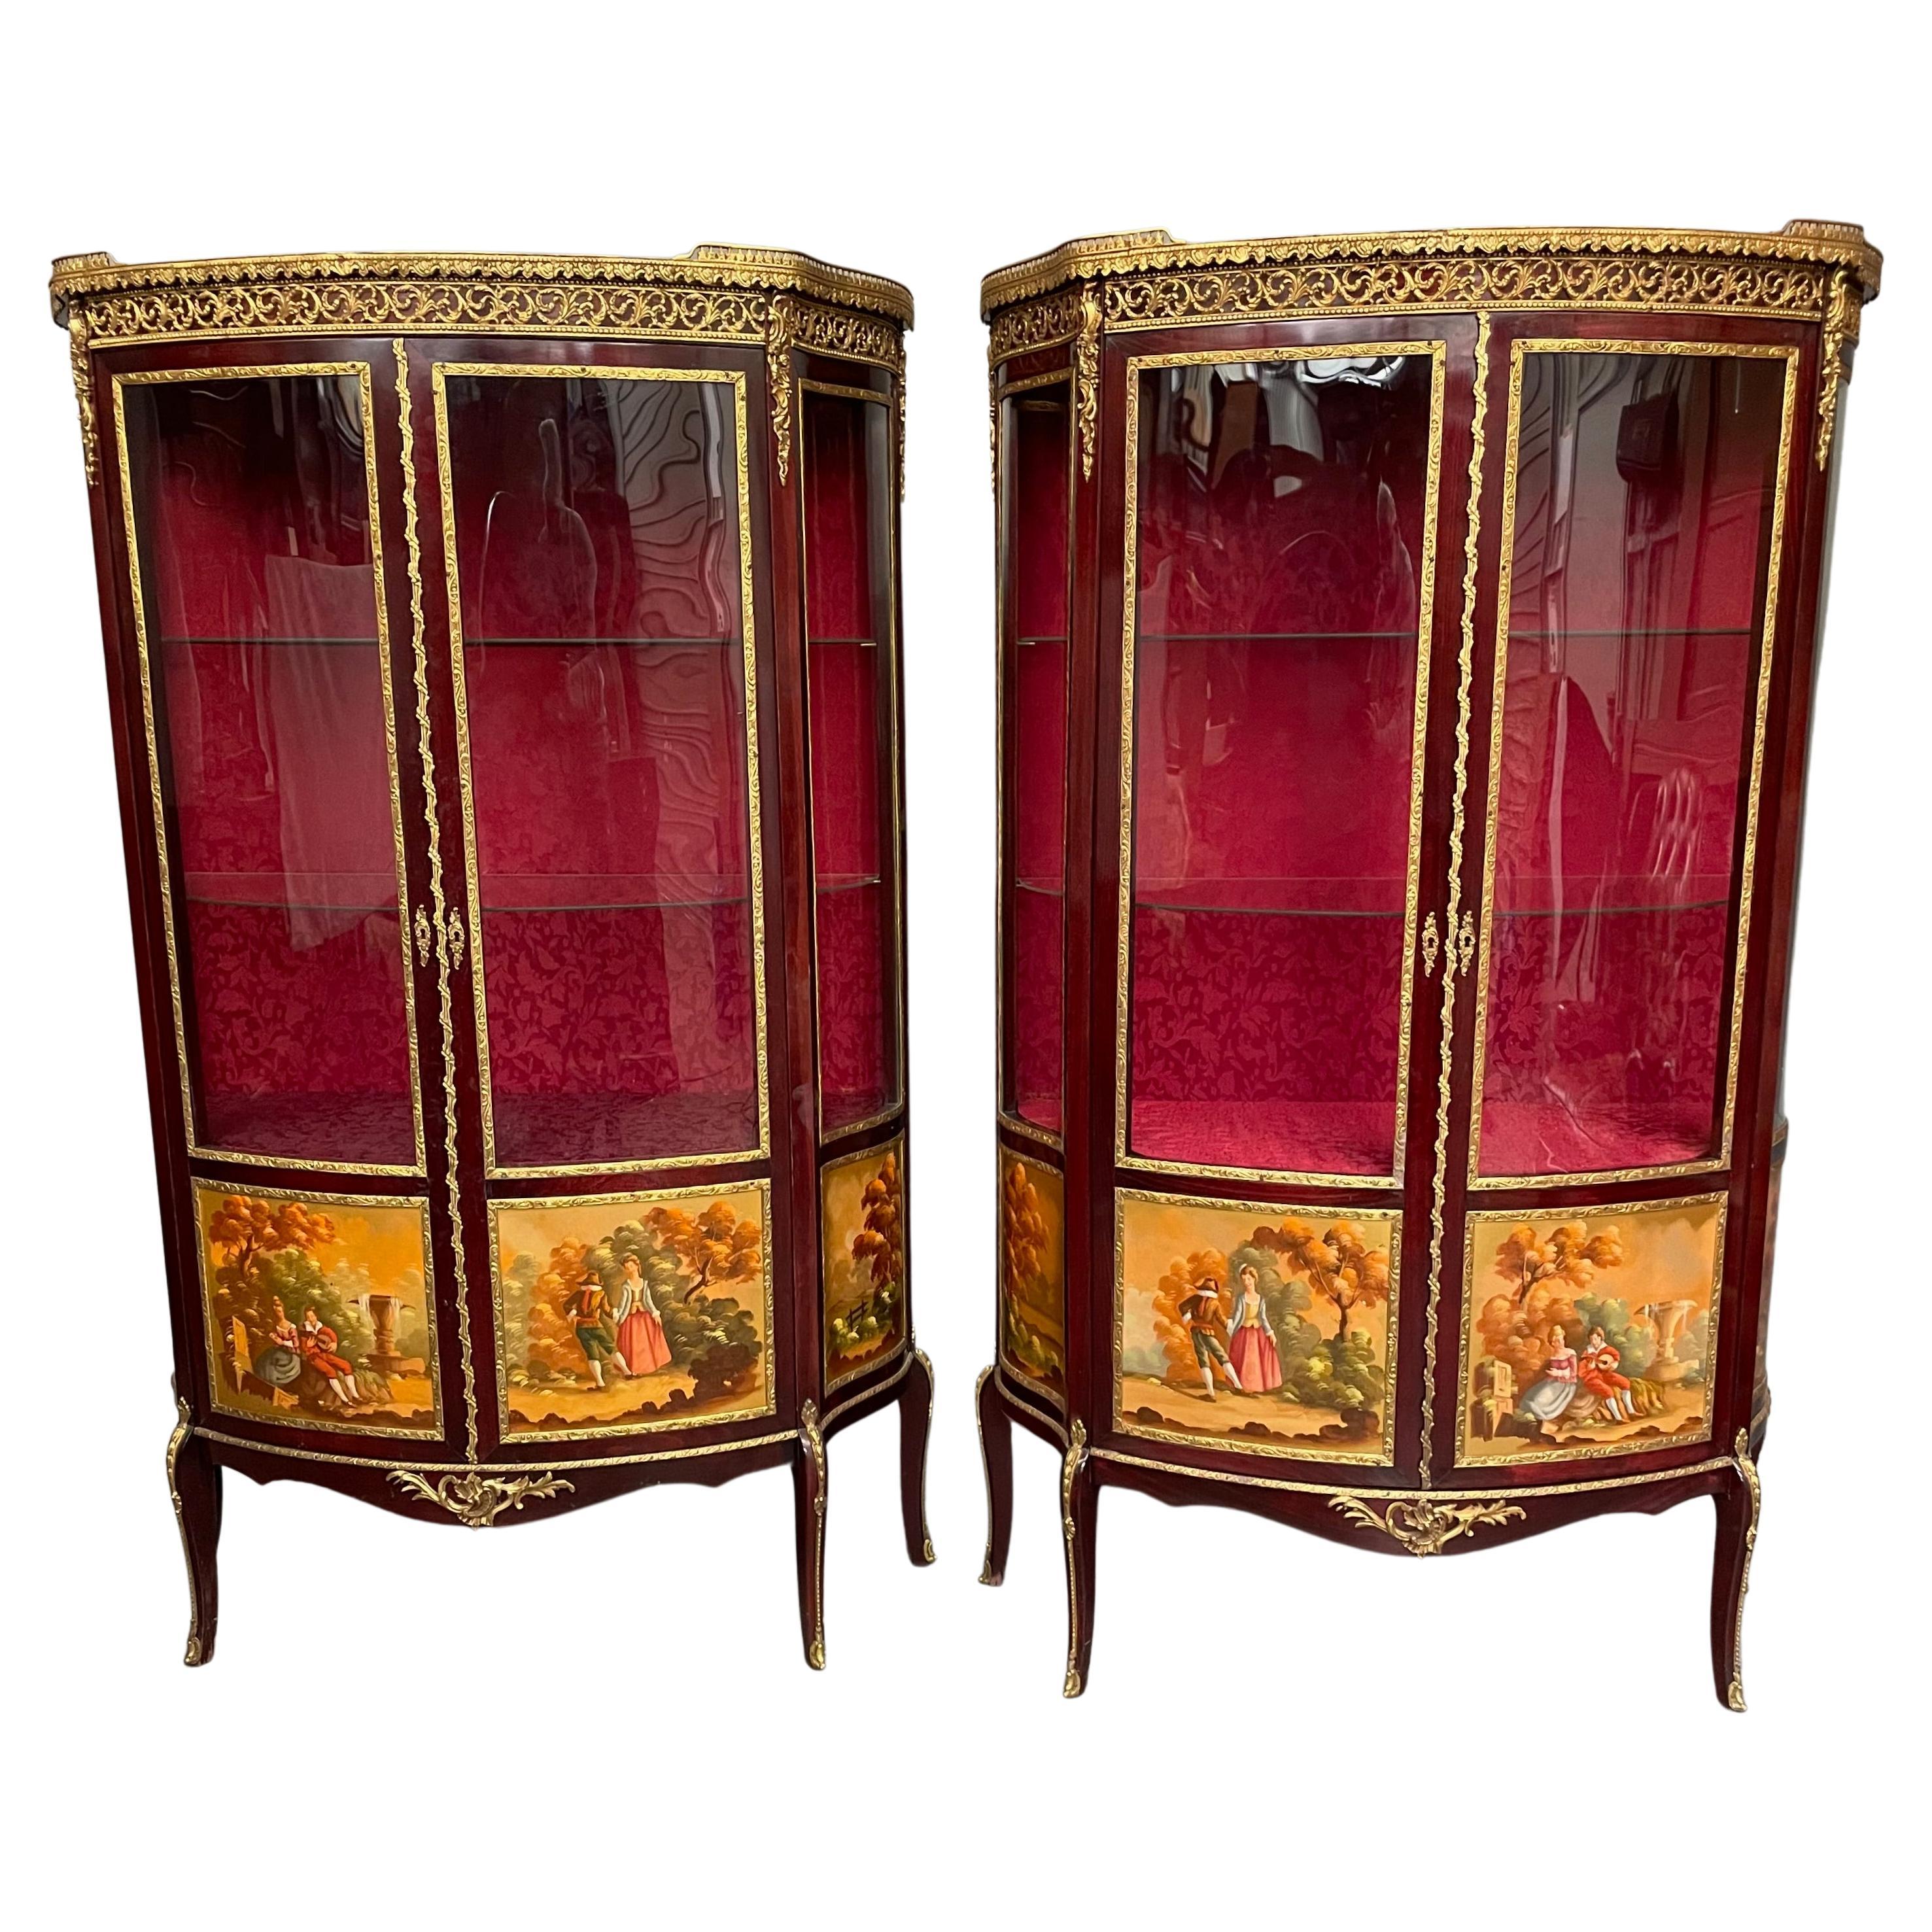 Pair of French Vernis Martin Vitrines Display Cabinets